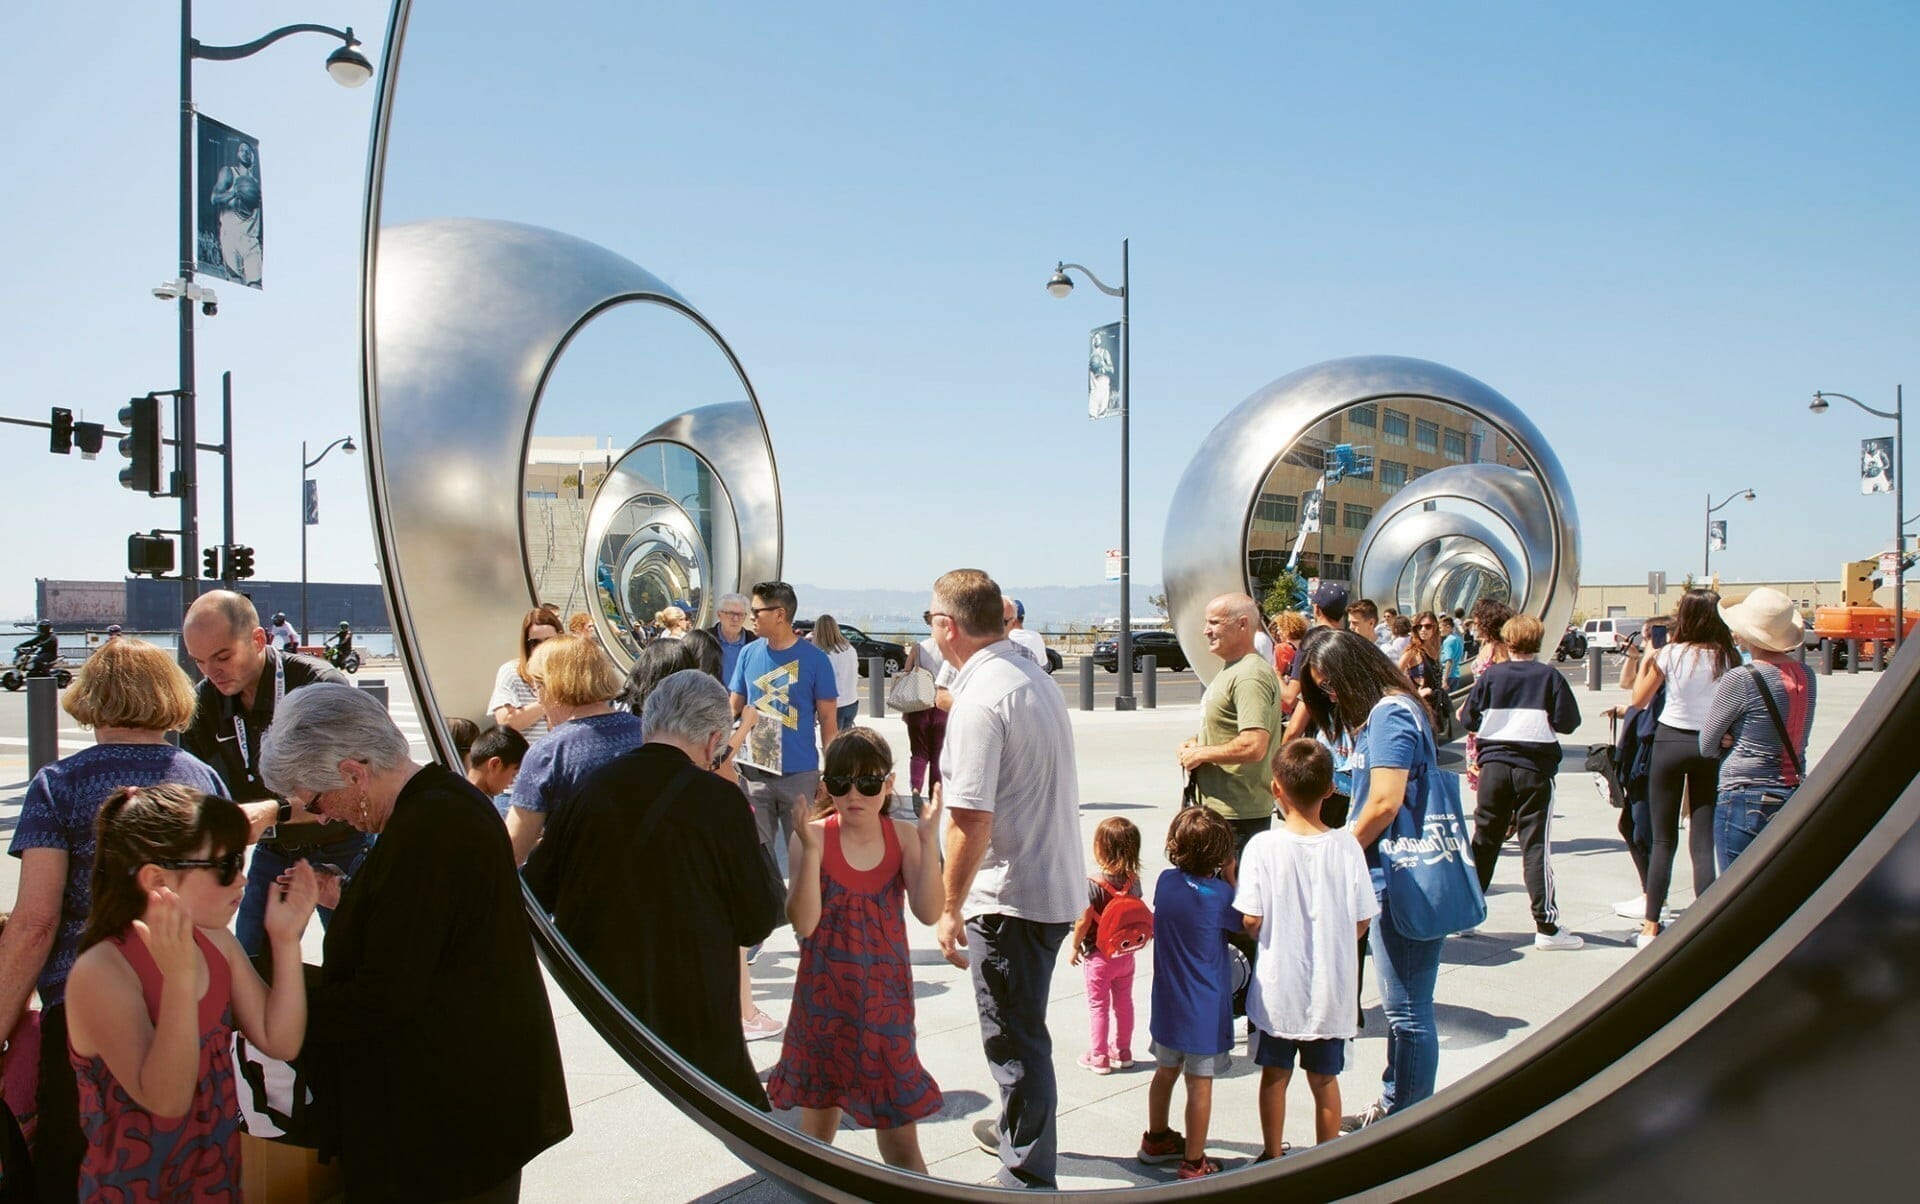 “Seeing Spheres” (2019), stainless steel, glass, silver, fiberglass, LEDs, 4.8 x 22 x 22 meters, each sphere, diameter 480 centimeters, installation view at Chase Center, San Francisco. Photo by Matthew Millman